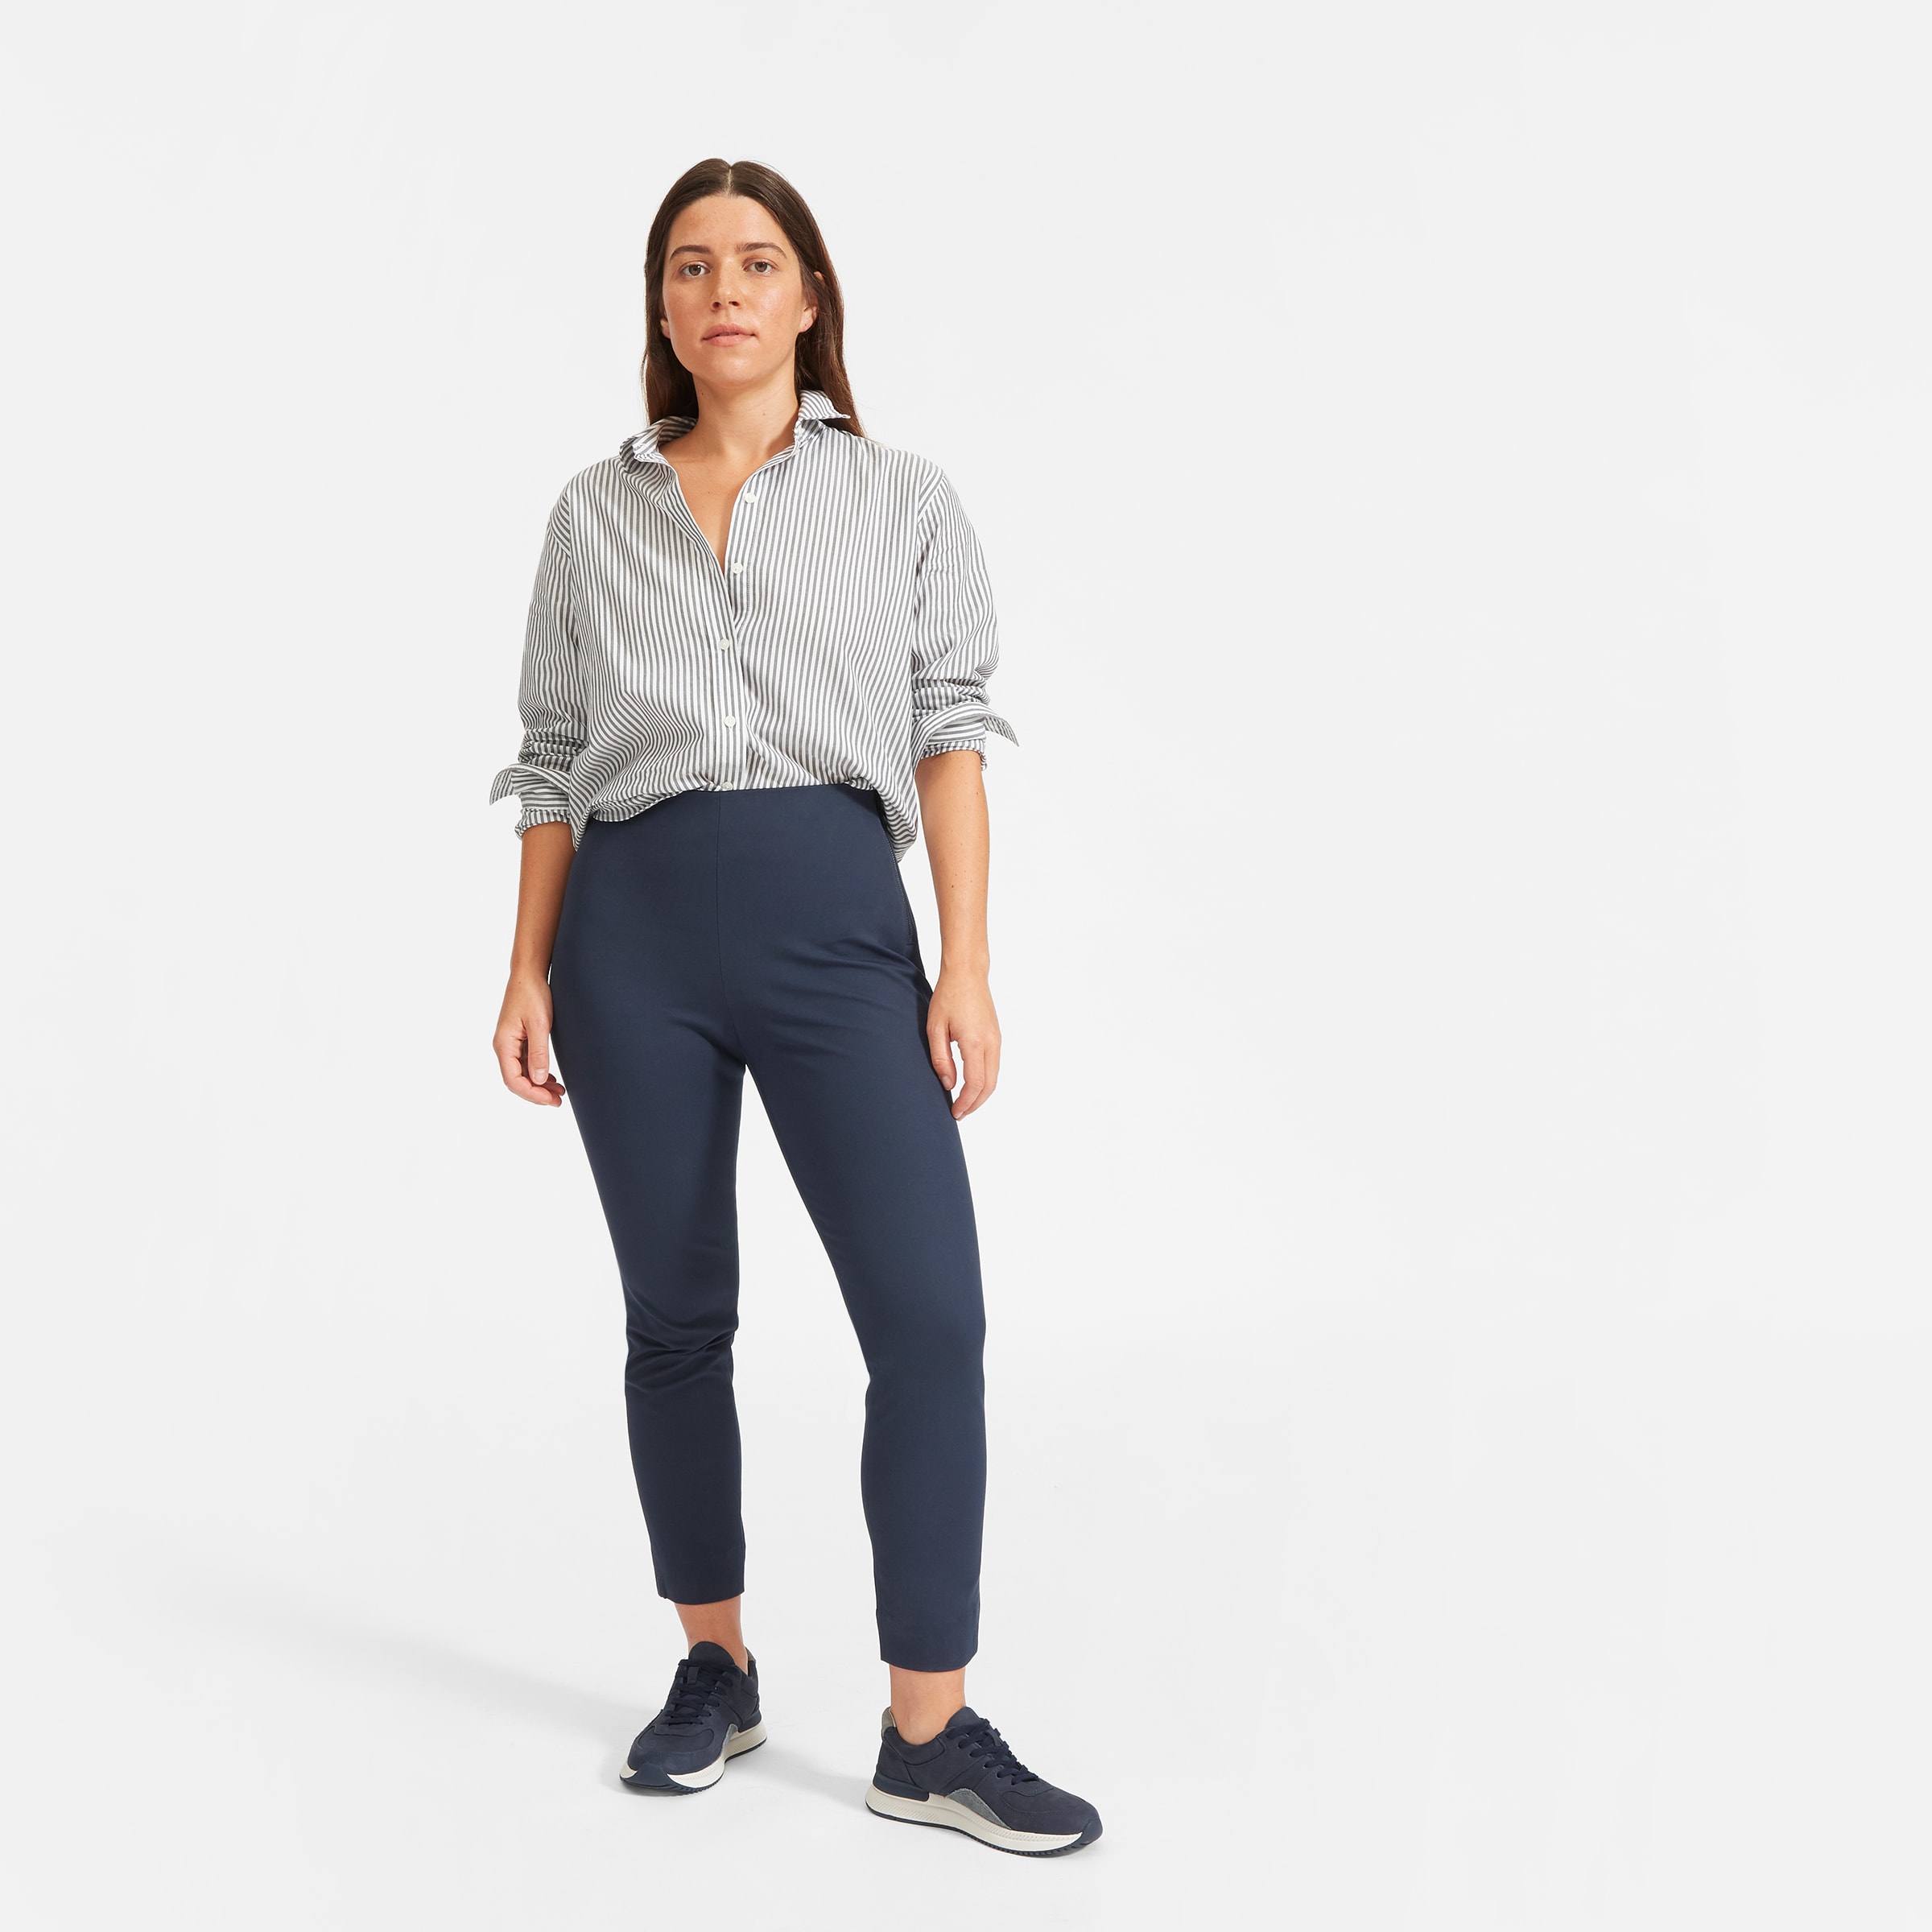 The Curvy Side-Zip Stretch Cotton Pant